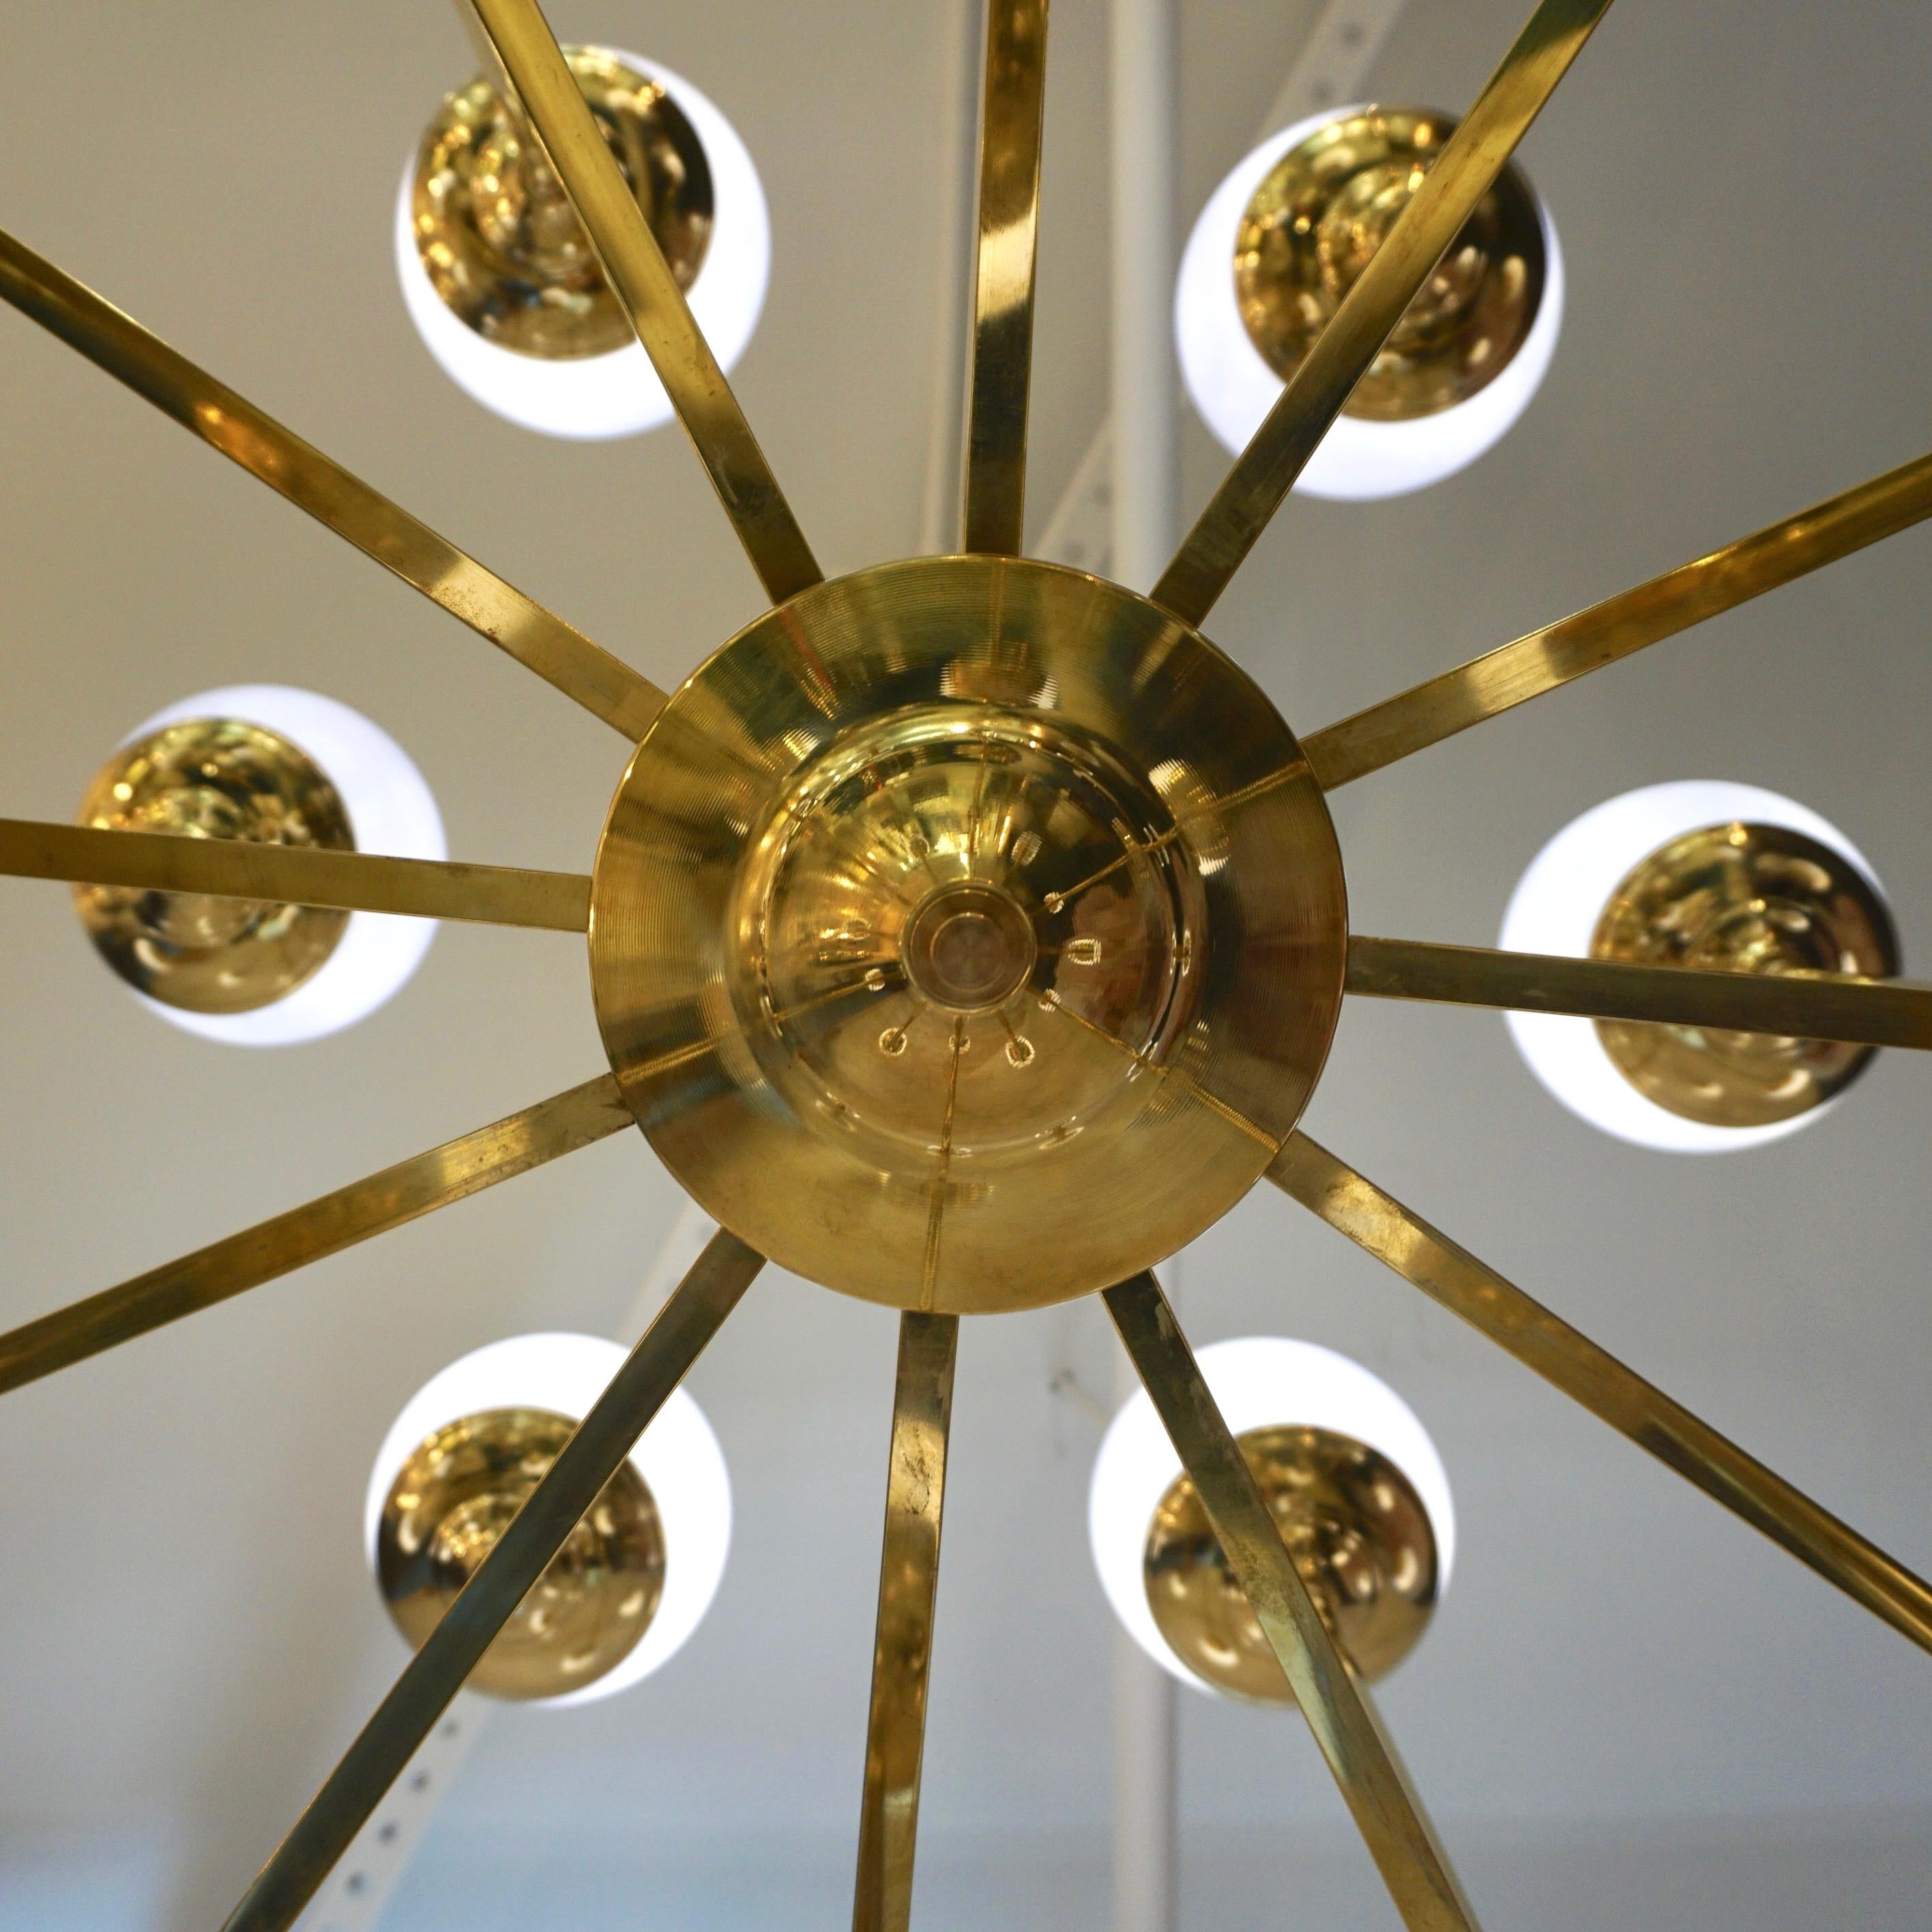 Contemporary custom made circular chandelier of Minimalist geometric design with a Mid-Century Modern Sputnik inspiration, entirely handcrafted in Italy. The brass structure is decorated with 24 blown Murano glass globes of an unusual bronze ivory